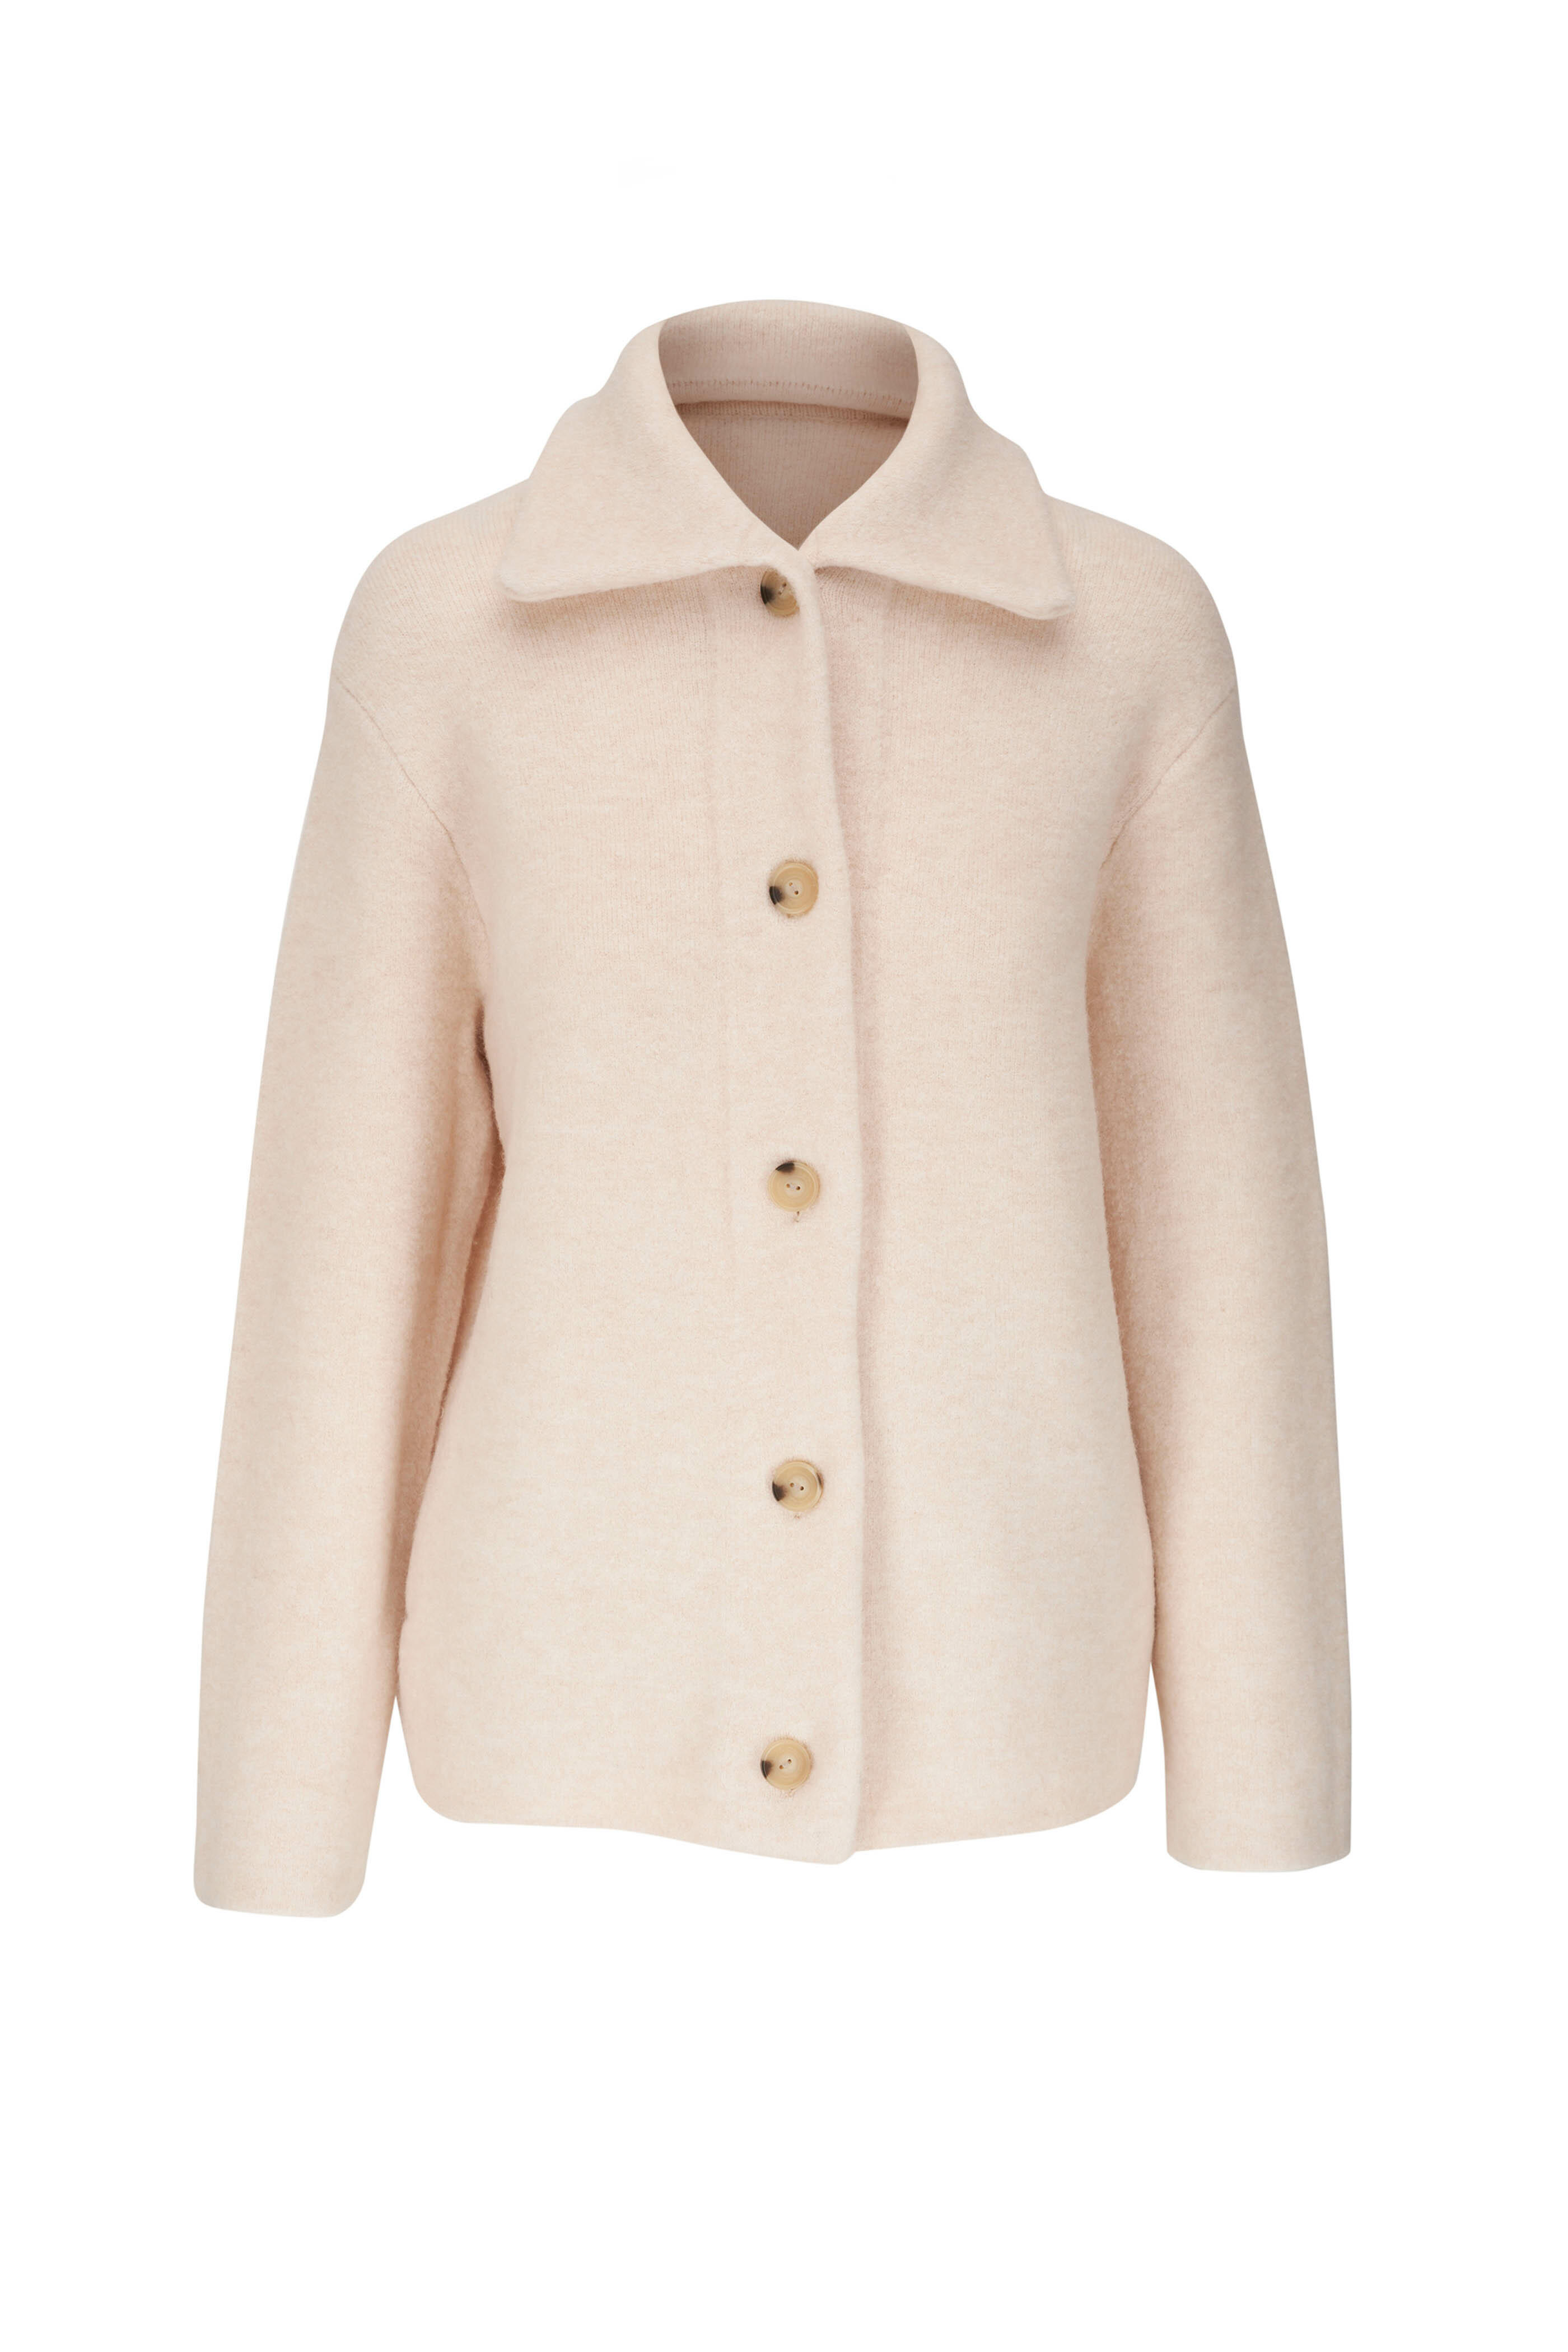 Vince - Heather Enoki Button Collared Cardigan | Mitchell Stores